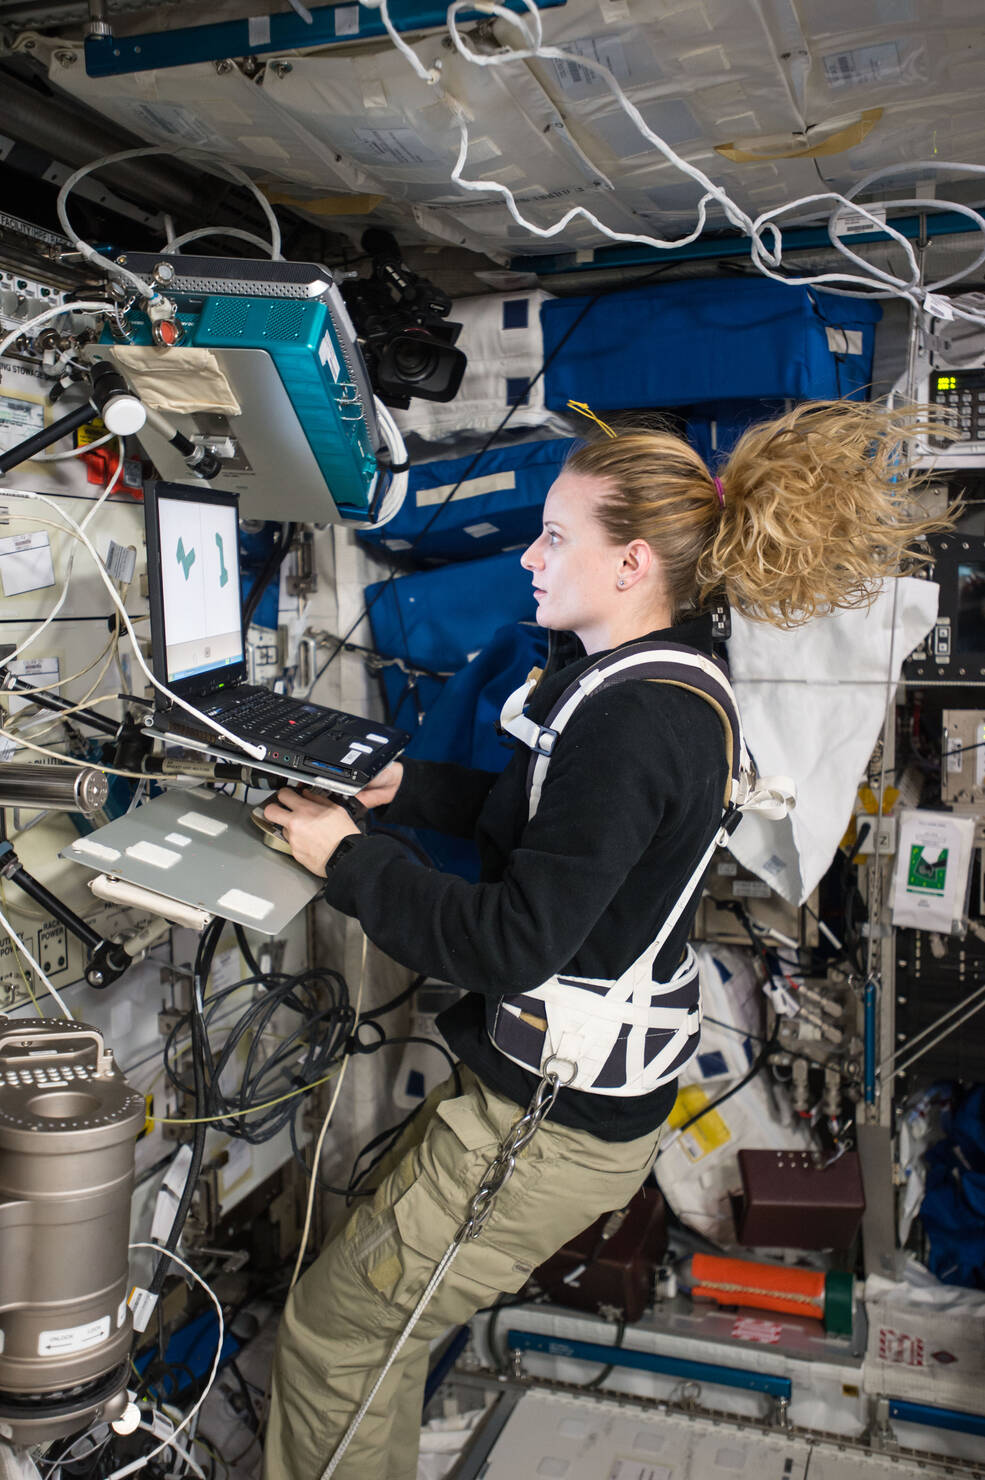 NASA astronaut Kate Rubins conducts a session for the Neuromapping investigation using a laptop computer on the ISS.